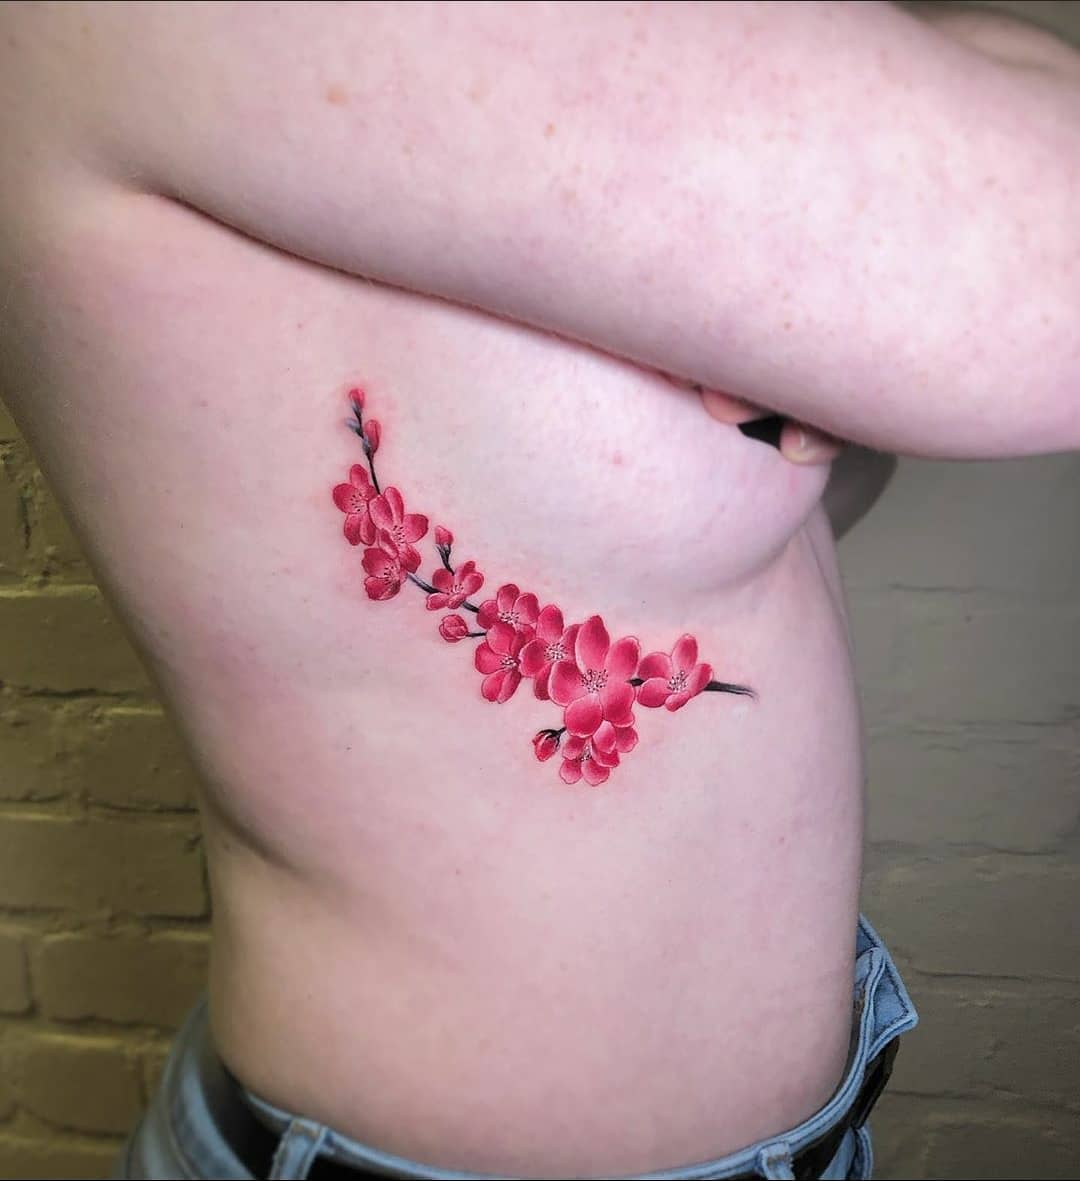 Cherry blossoms for Beth!
Tattoo by Noemi!!!!
